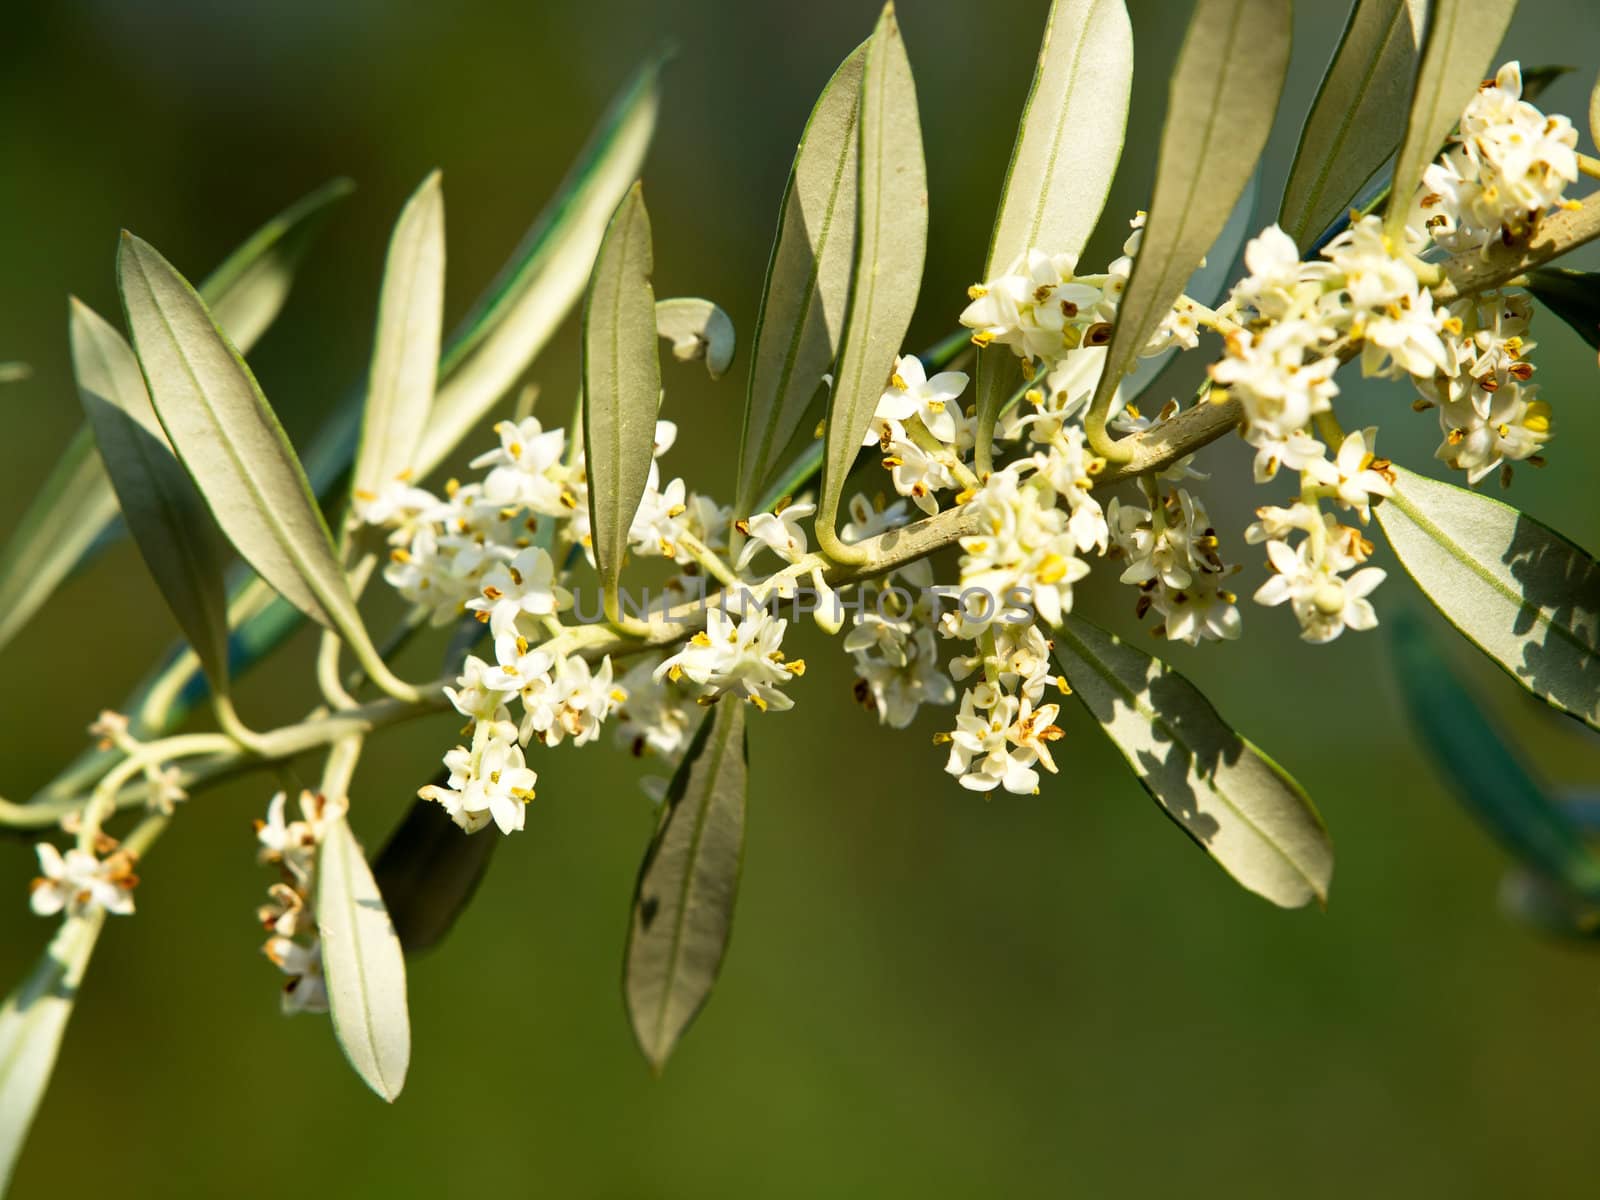 olive tre flowers in the spring by nevenm